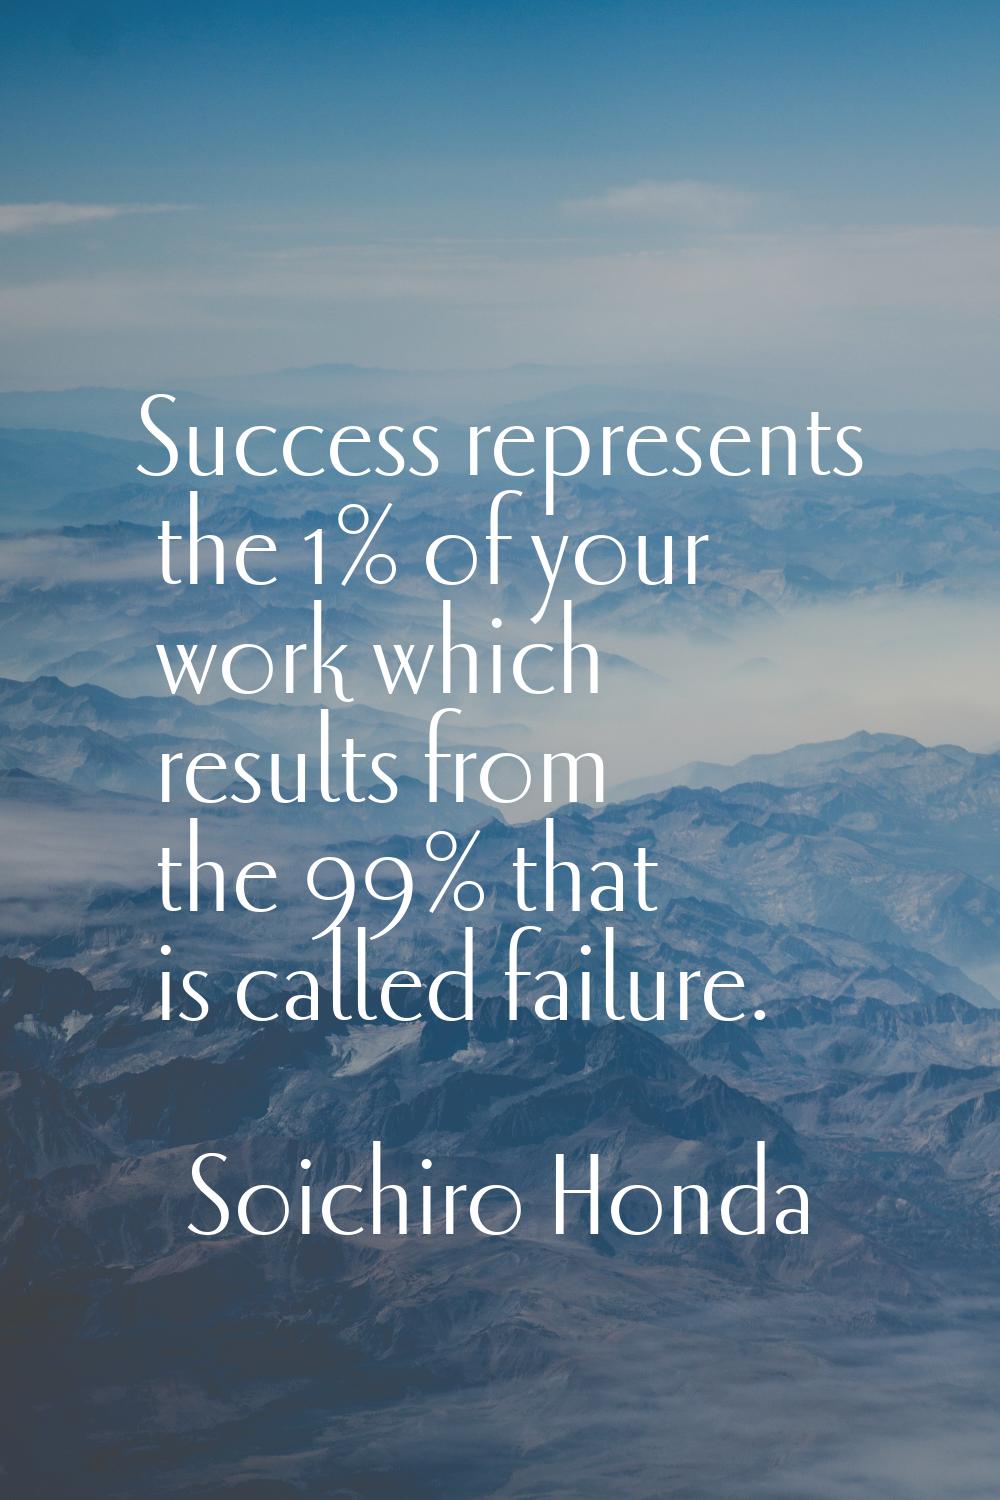 Success represents the 1% of your work which results from the 99% that is called failure.